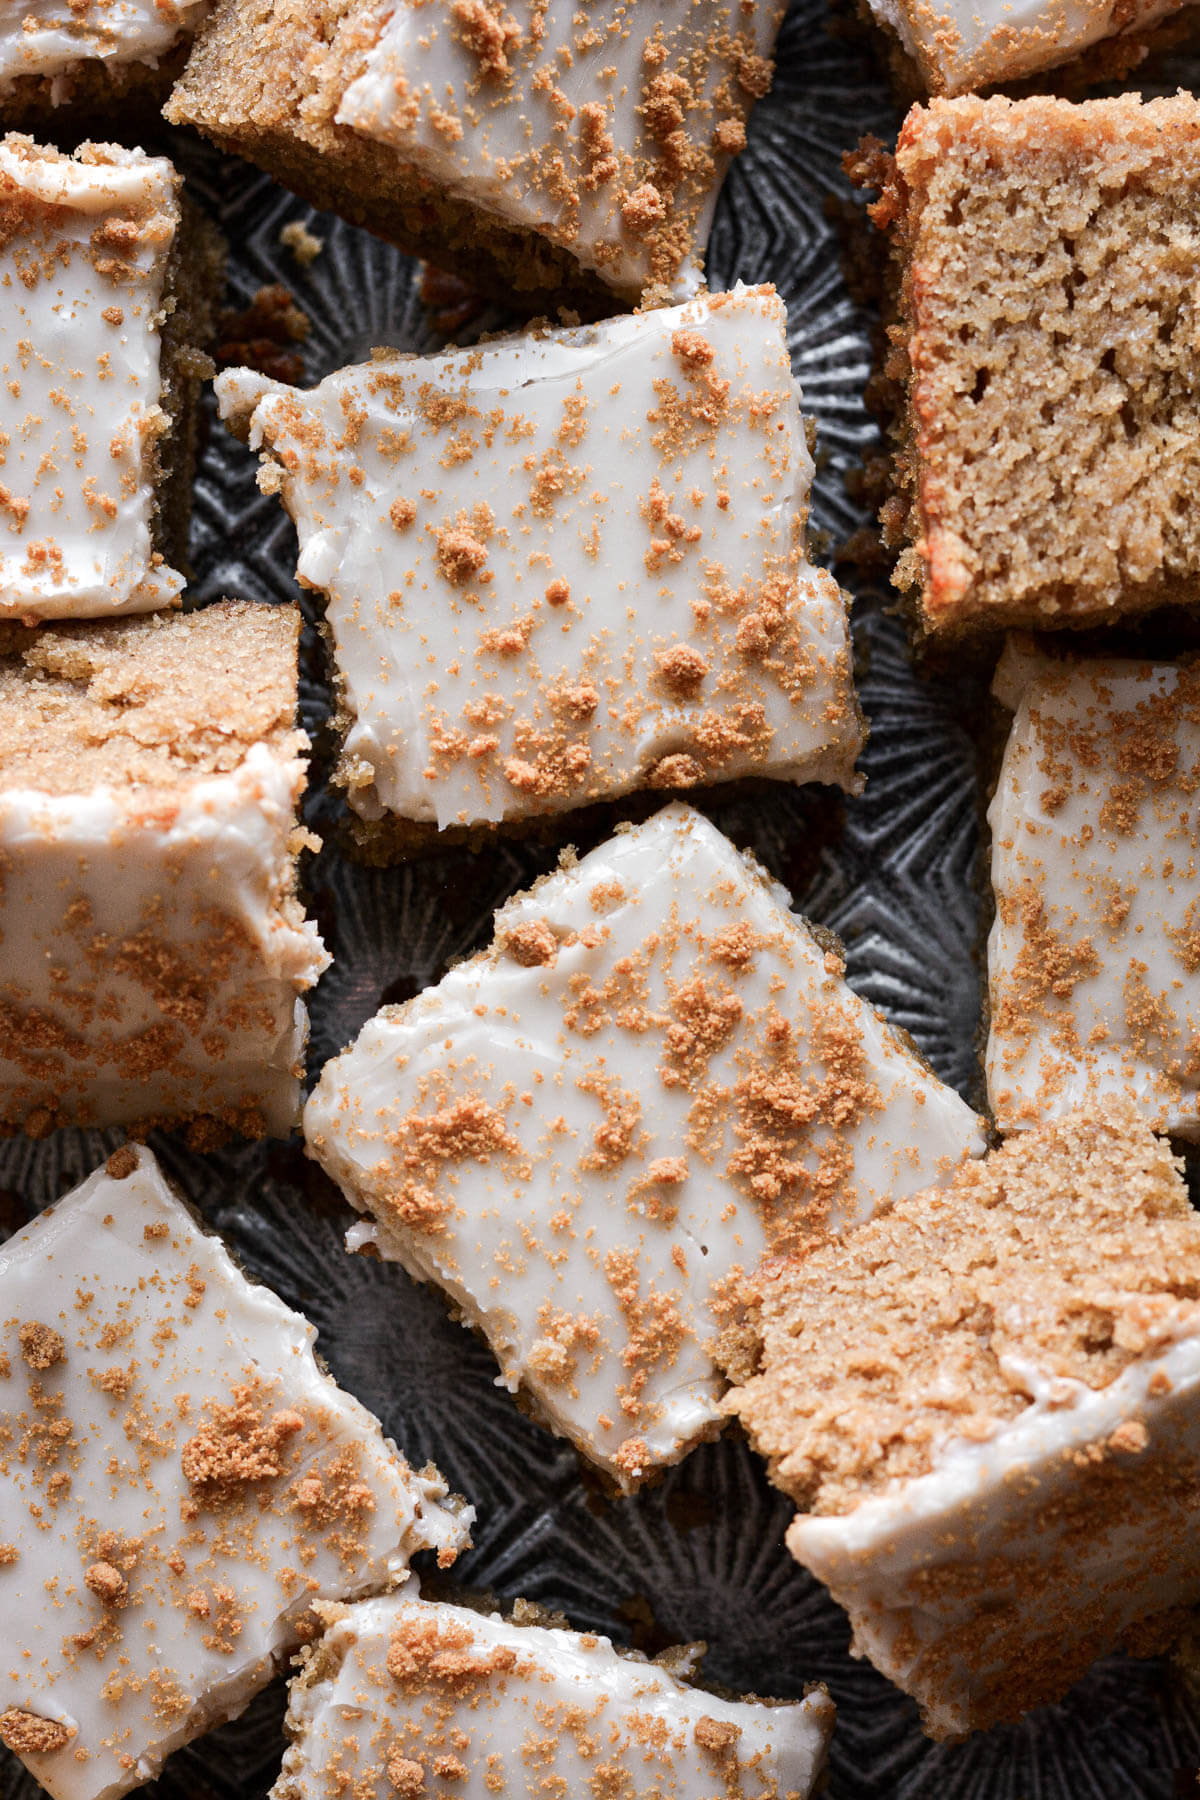 Gingerbread bars with maple icing and crumbled biscoff cookies.